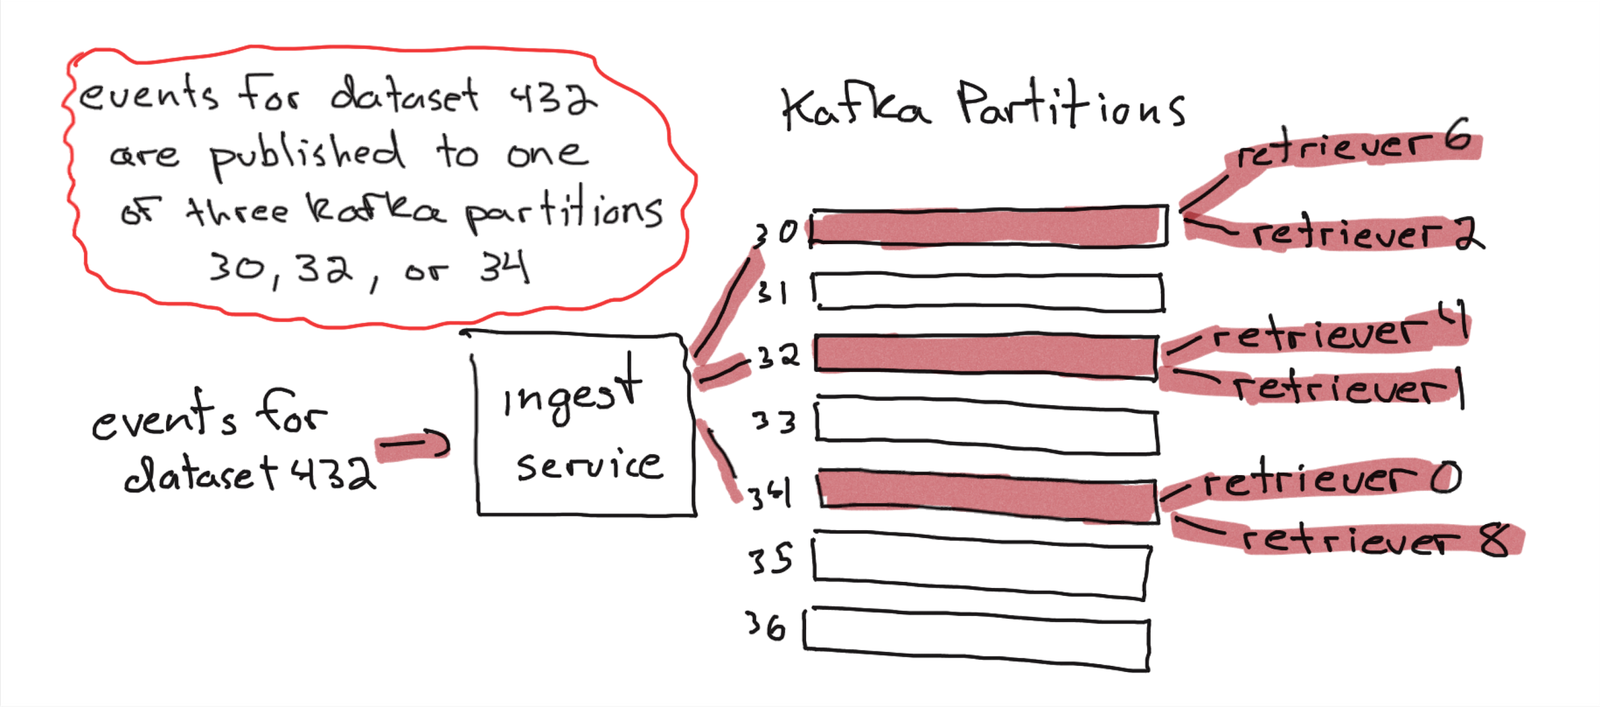 Events received by the ingest service are published to one of several assigned kafka partitions and consumed by two retriever nodes doing redundant work.